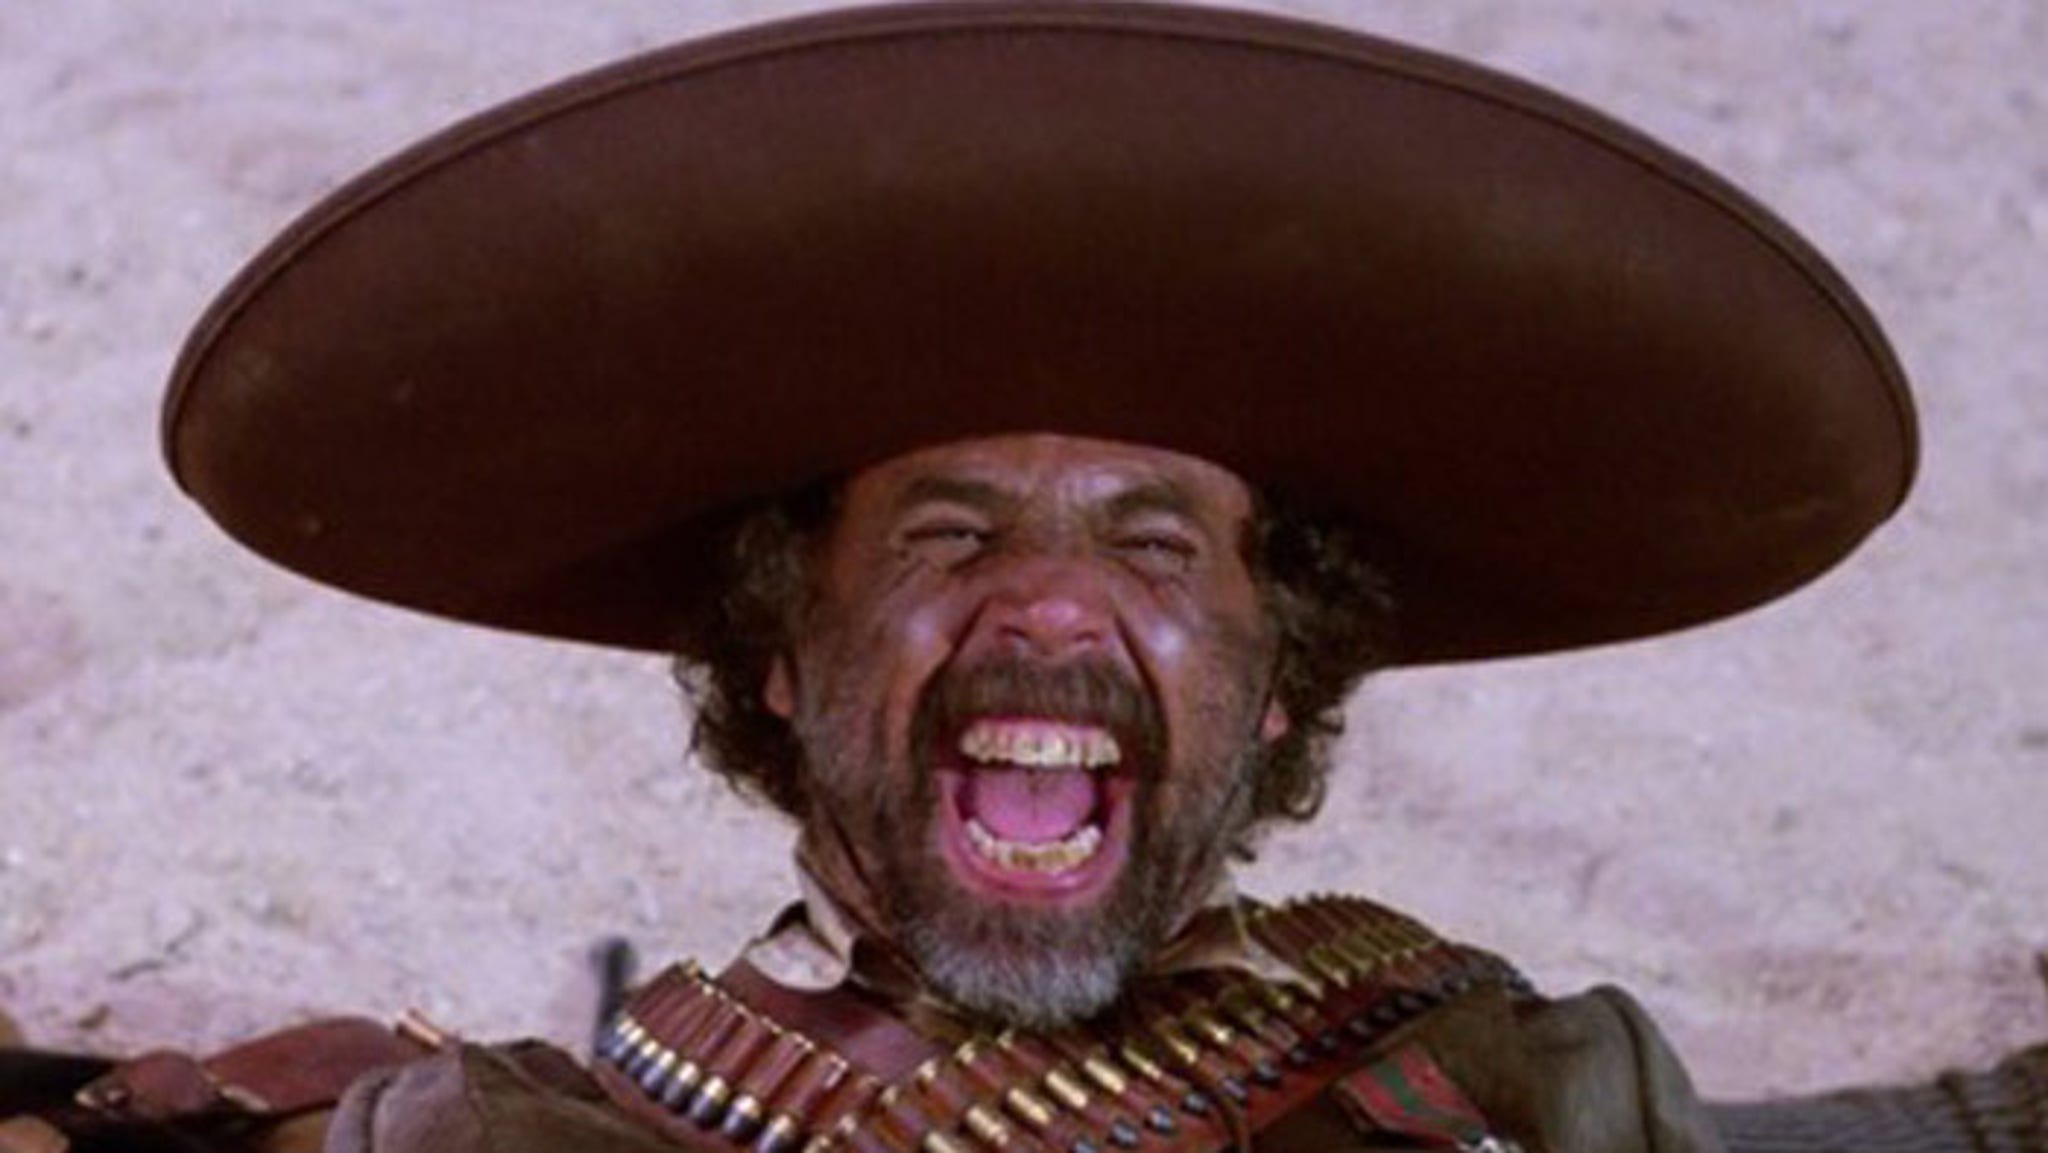 Three Amigos El Guapo is 33 years old [HQ] on Make a GIF